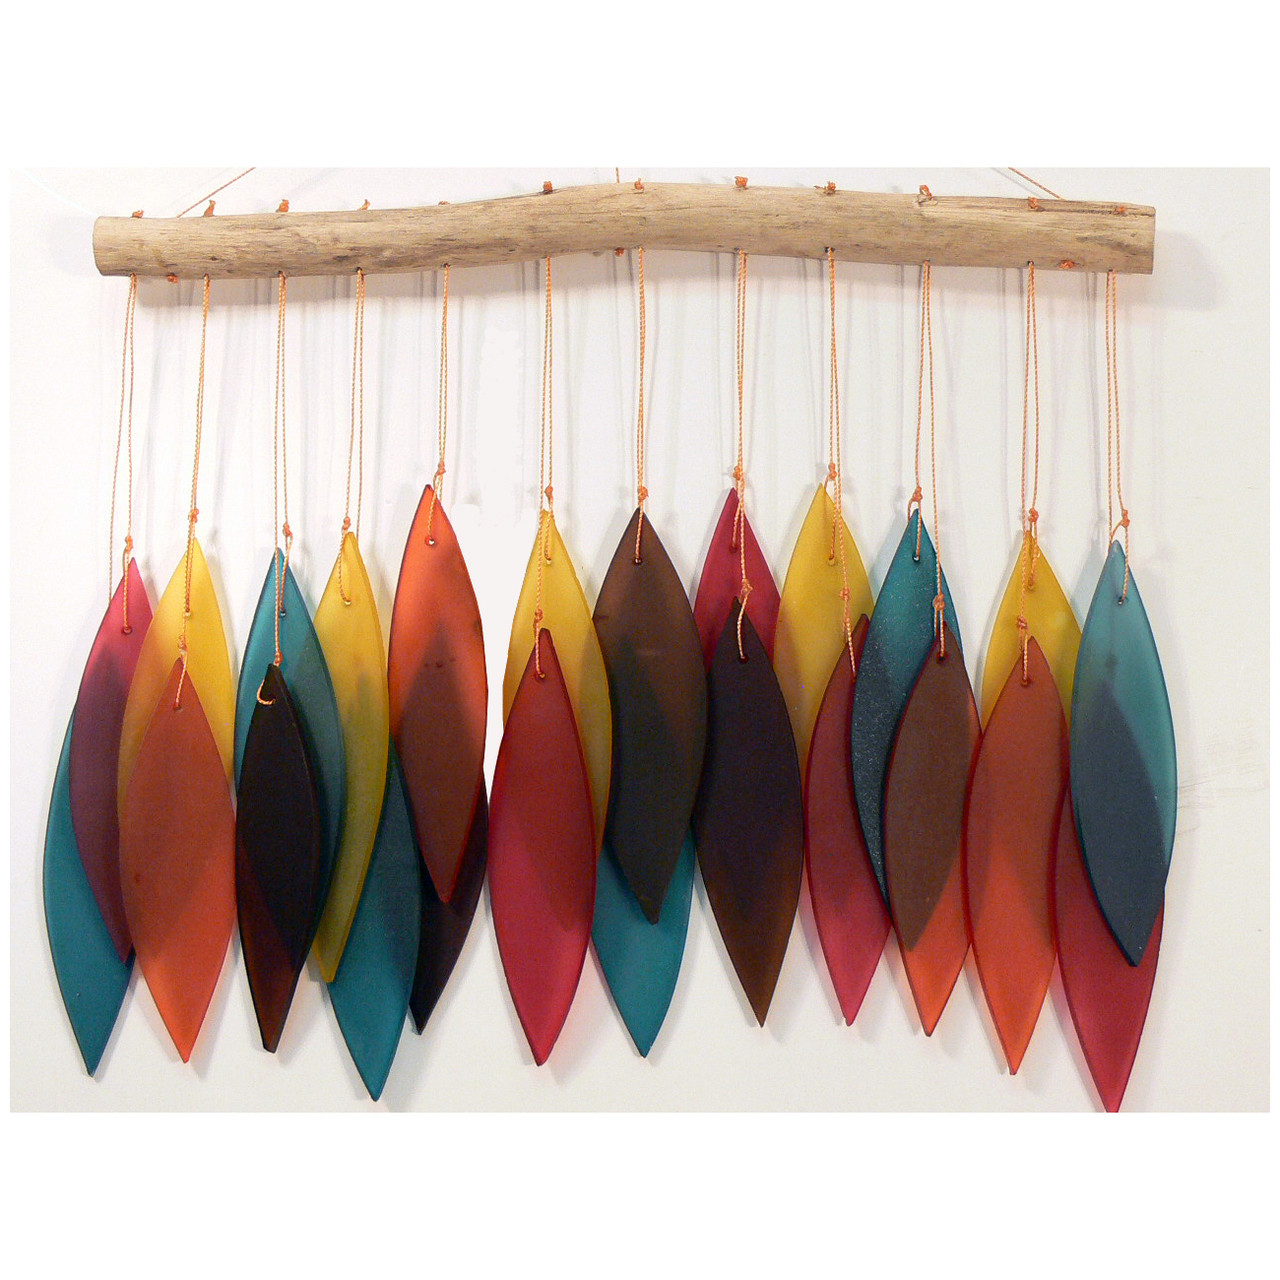 Garden Outdoor Living Hand made recycled Beach Glass Leaf Wind Chime